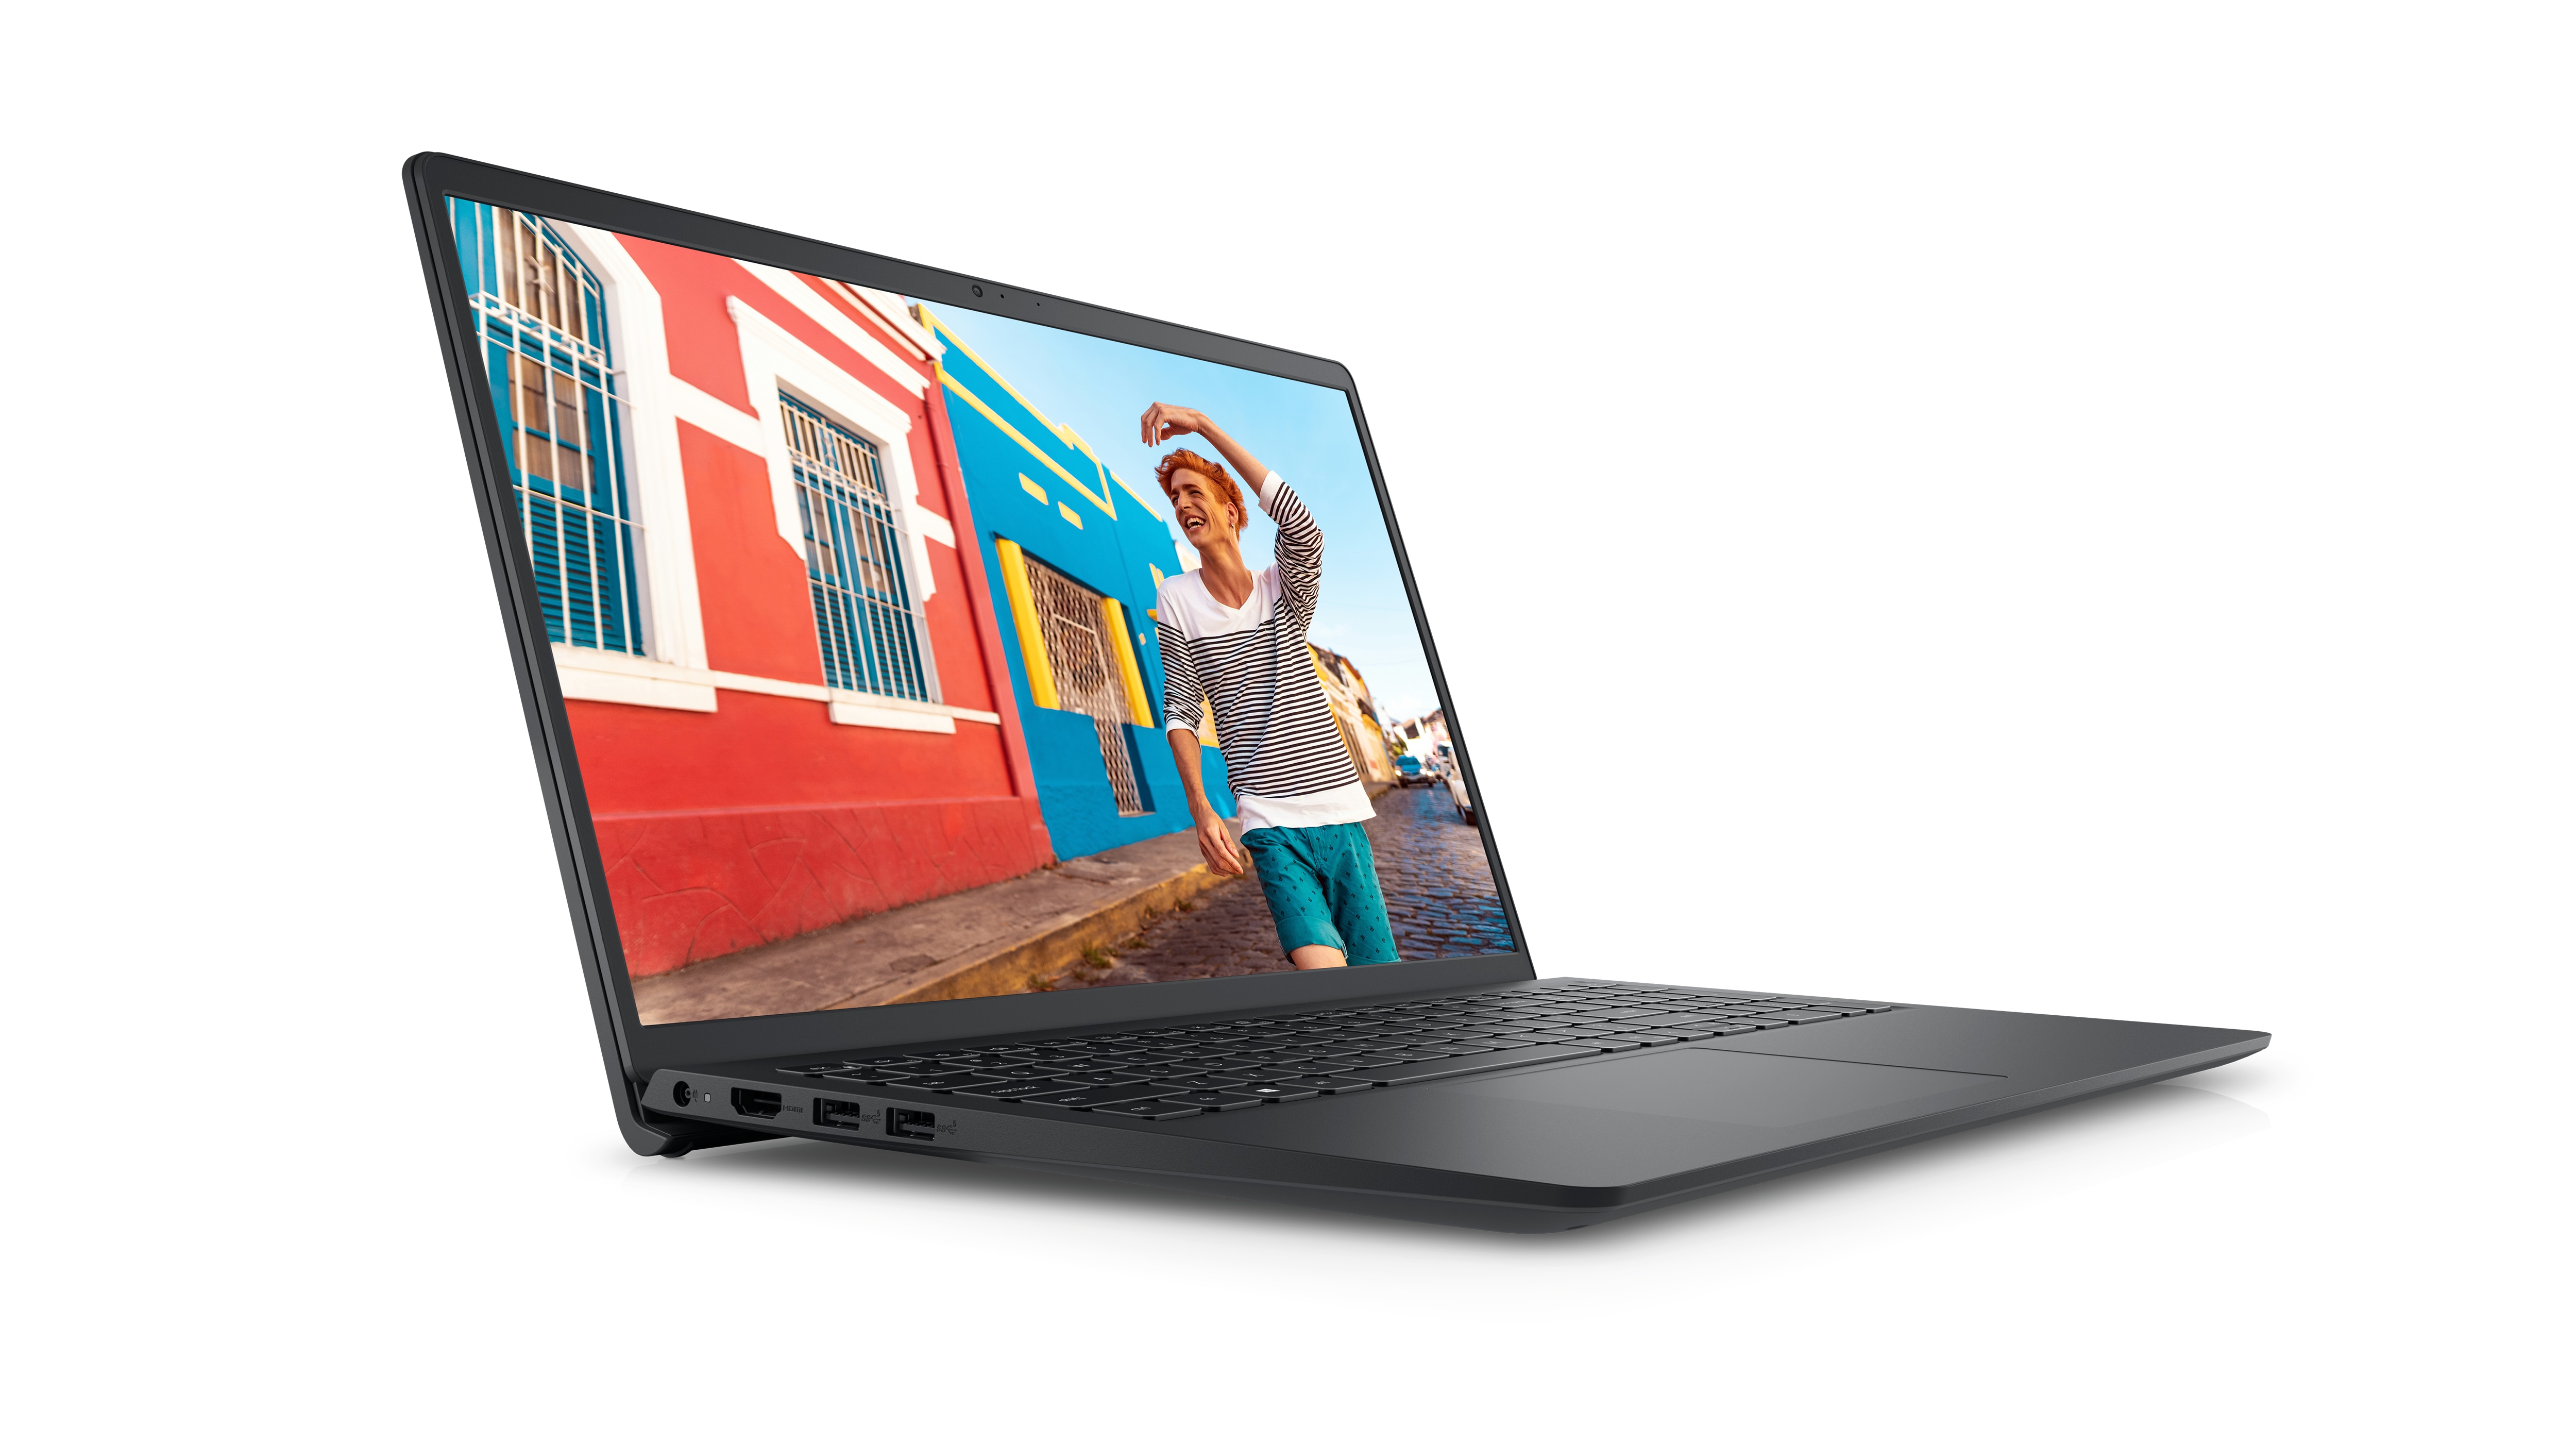 Picture of a Dell Inspiron 15 3525 Laptop with a smiley man wearing a black and white shirt in front of a colorful landscape.